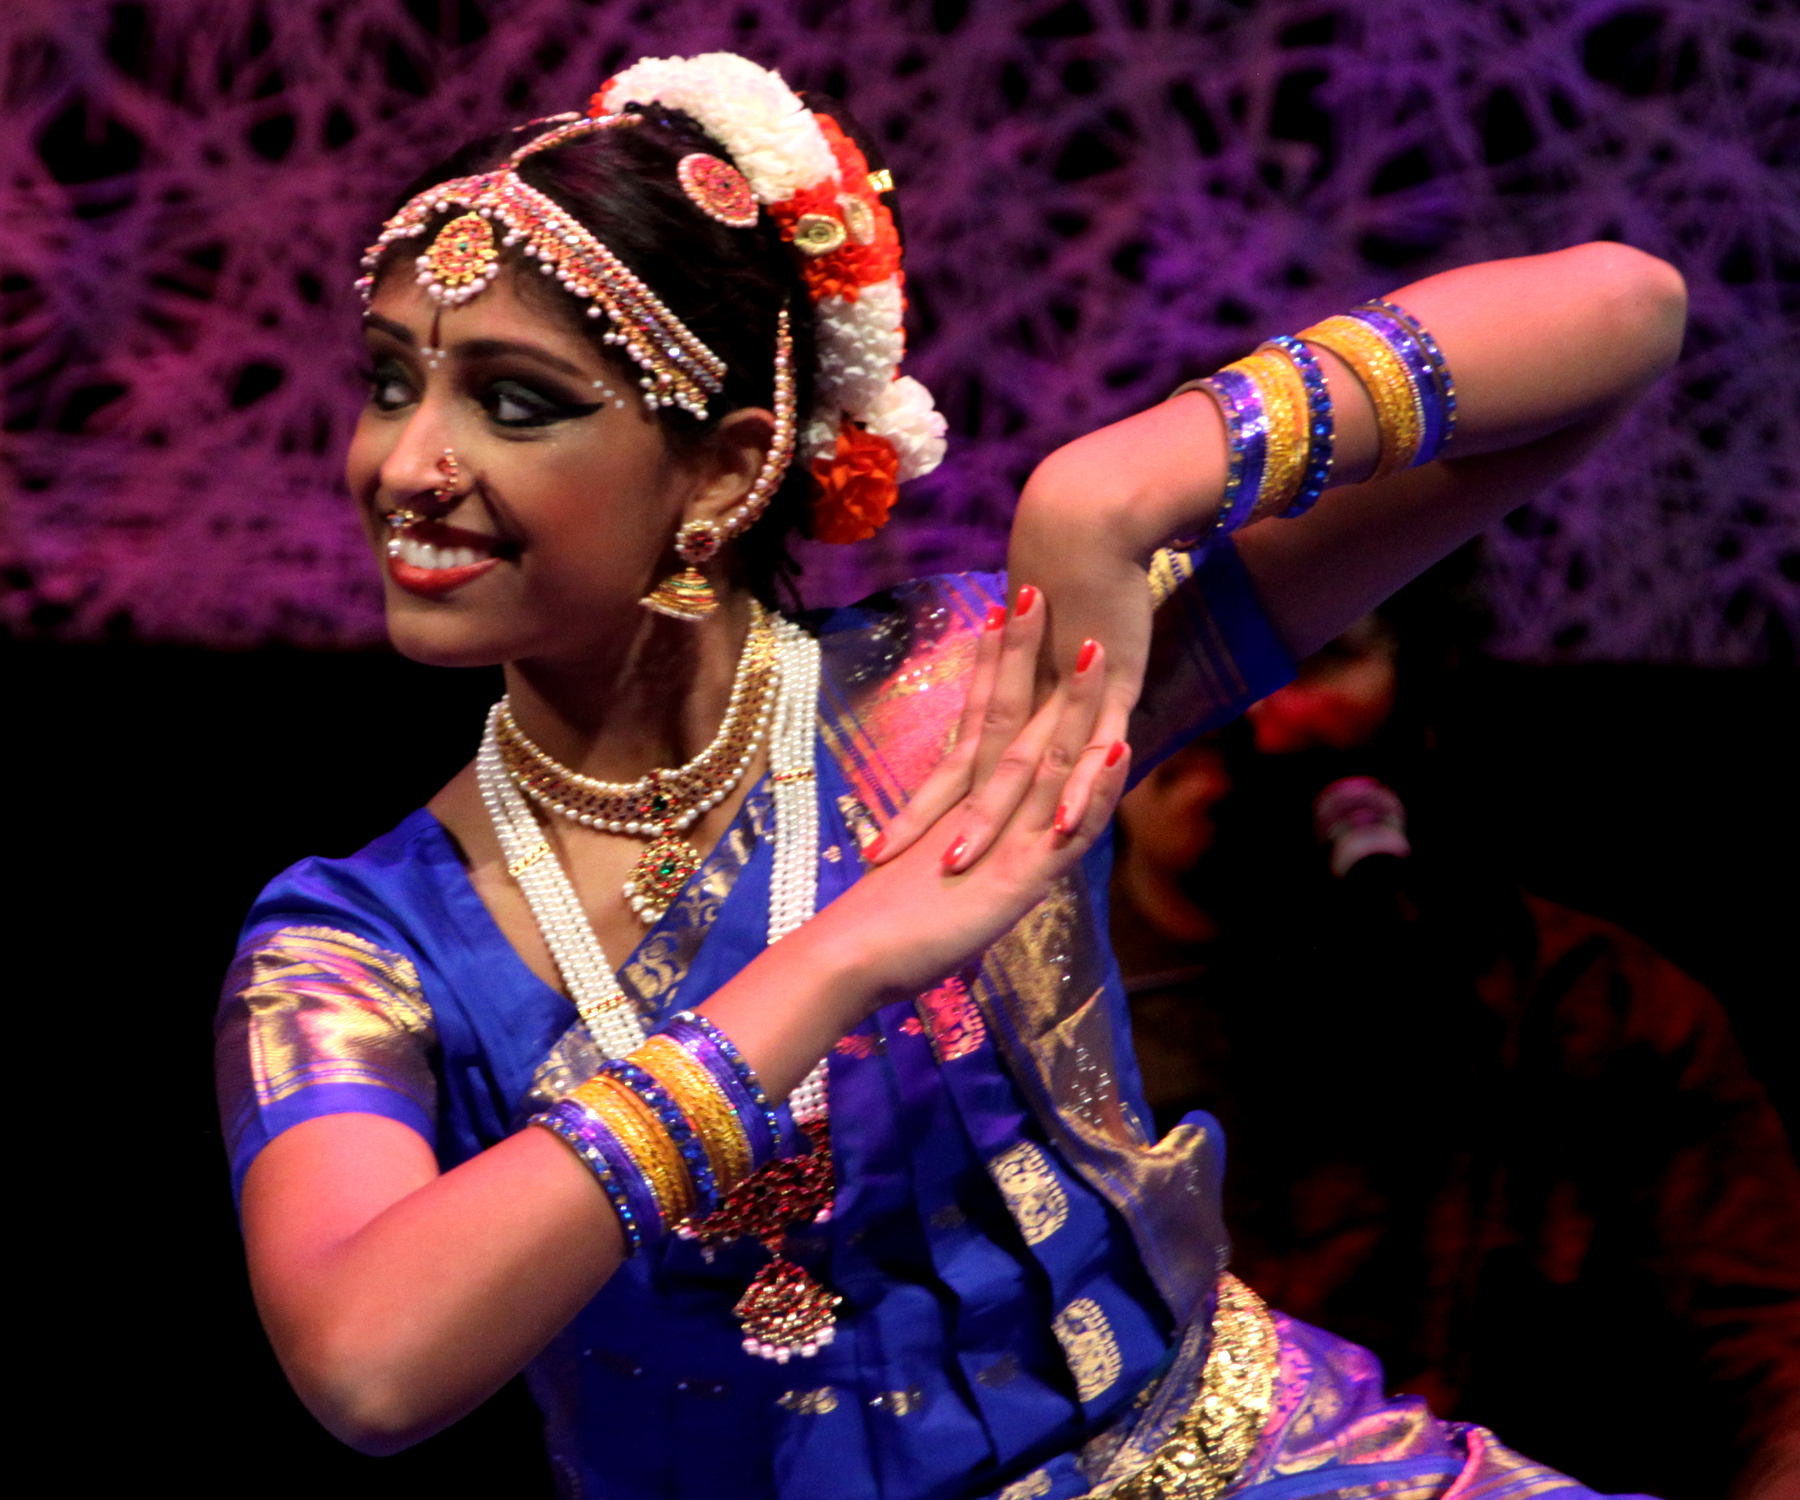 Indian woman dressed in traditional garb dances a classical bharatanatyam dance